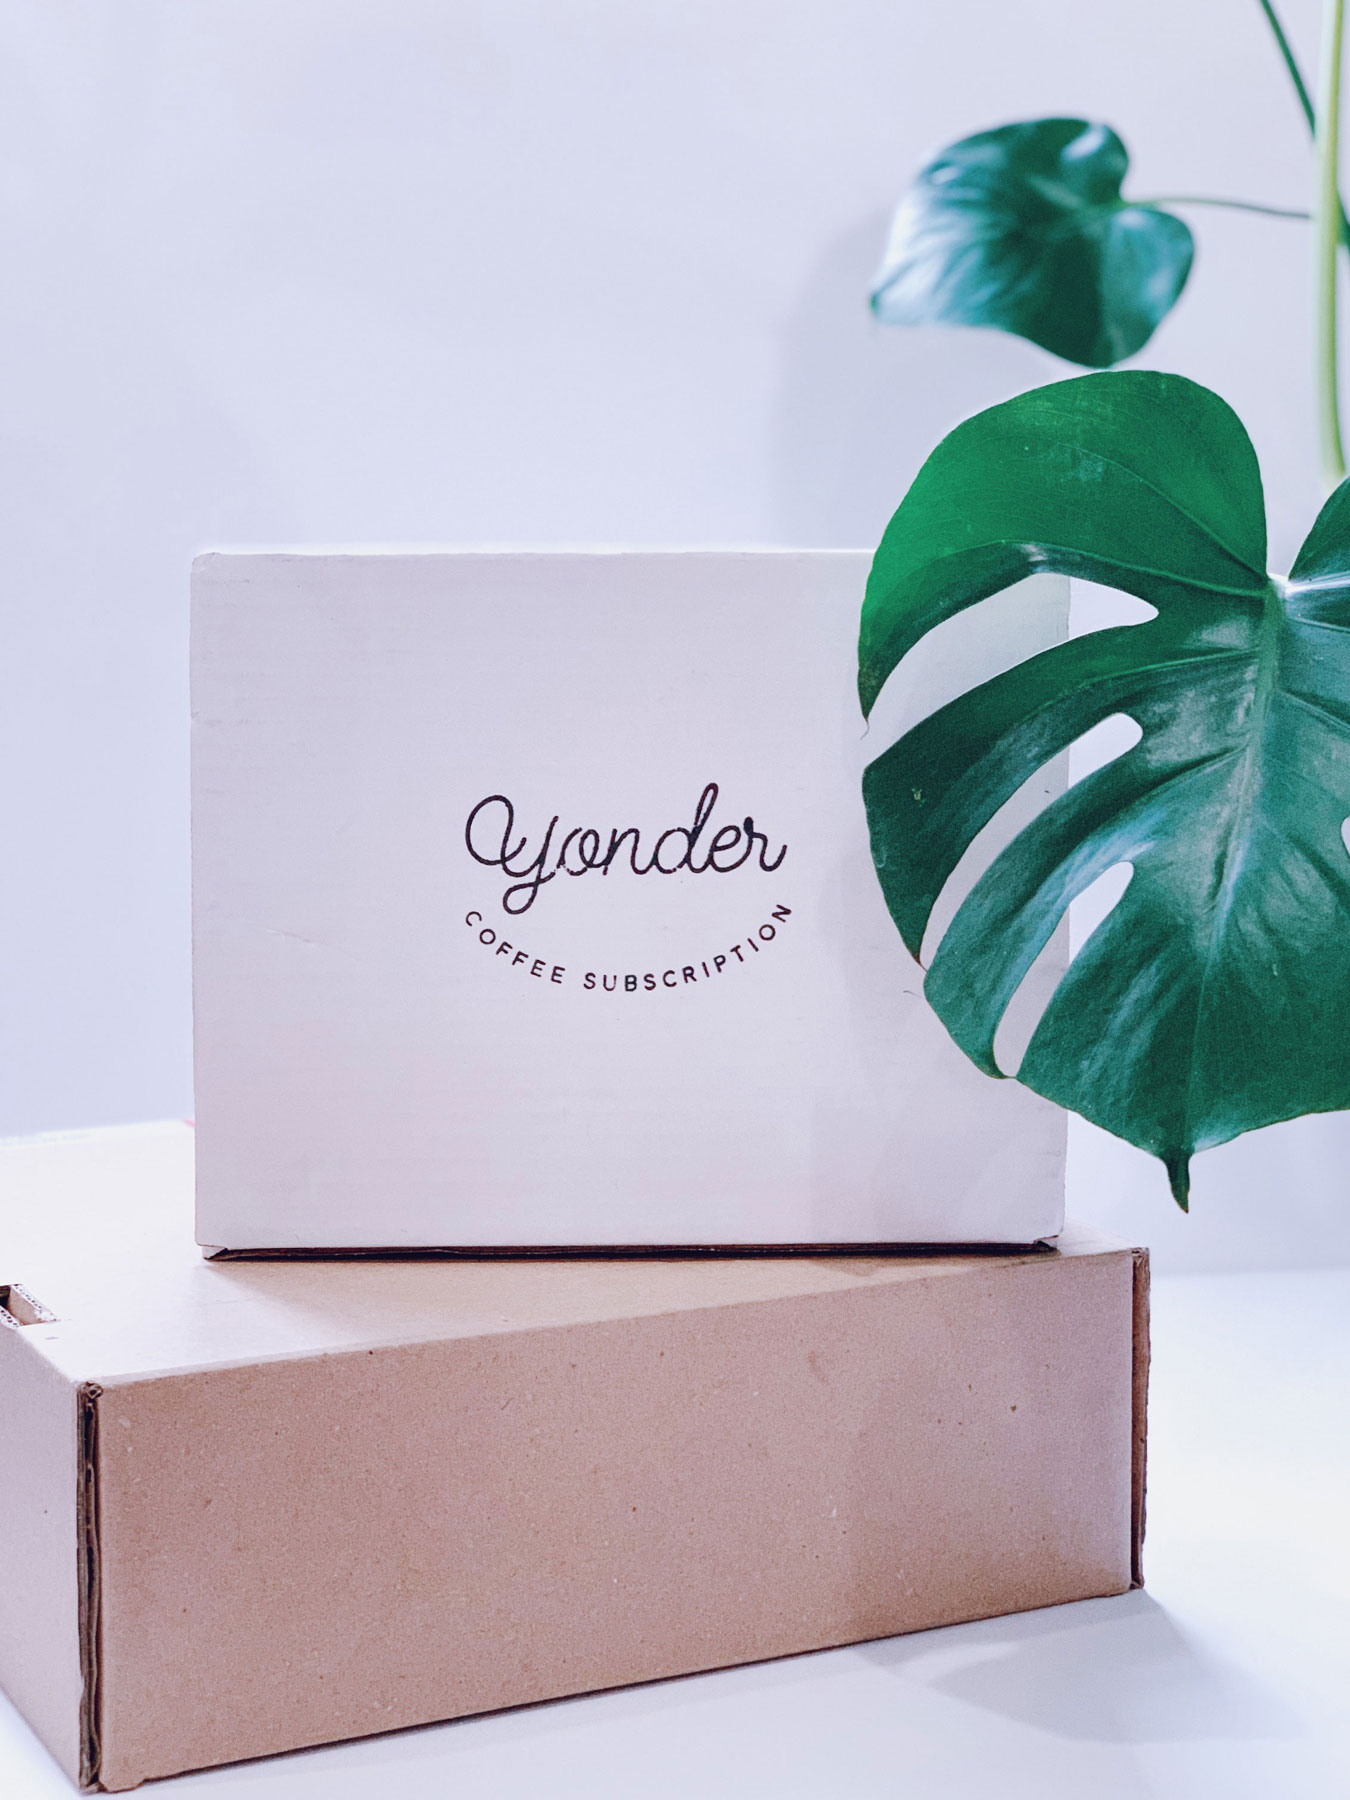 Yonder Coffee Packaging with Plant